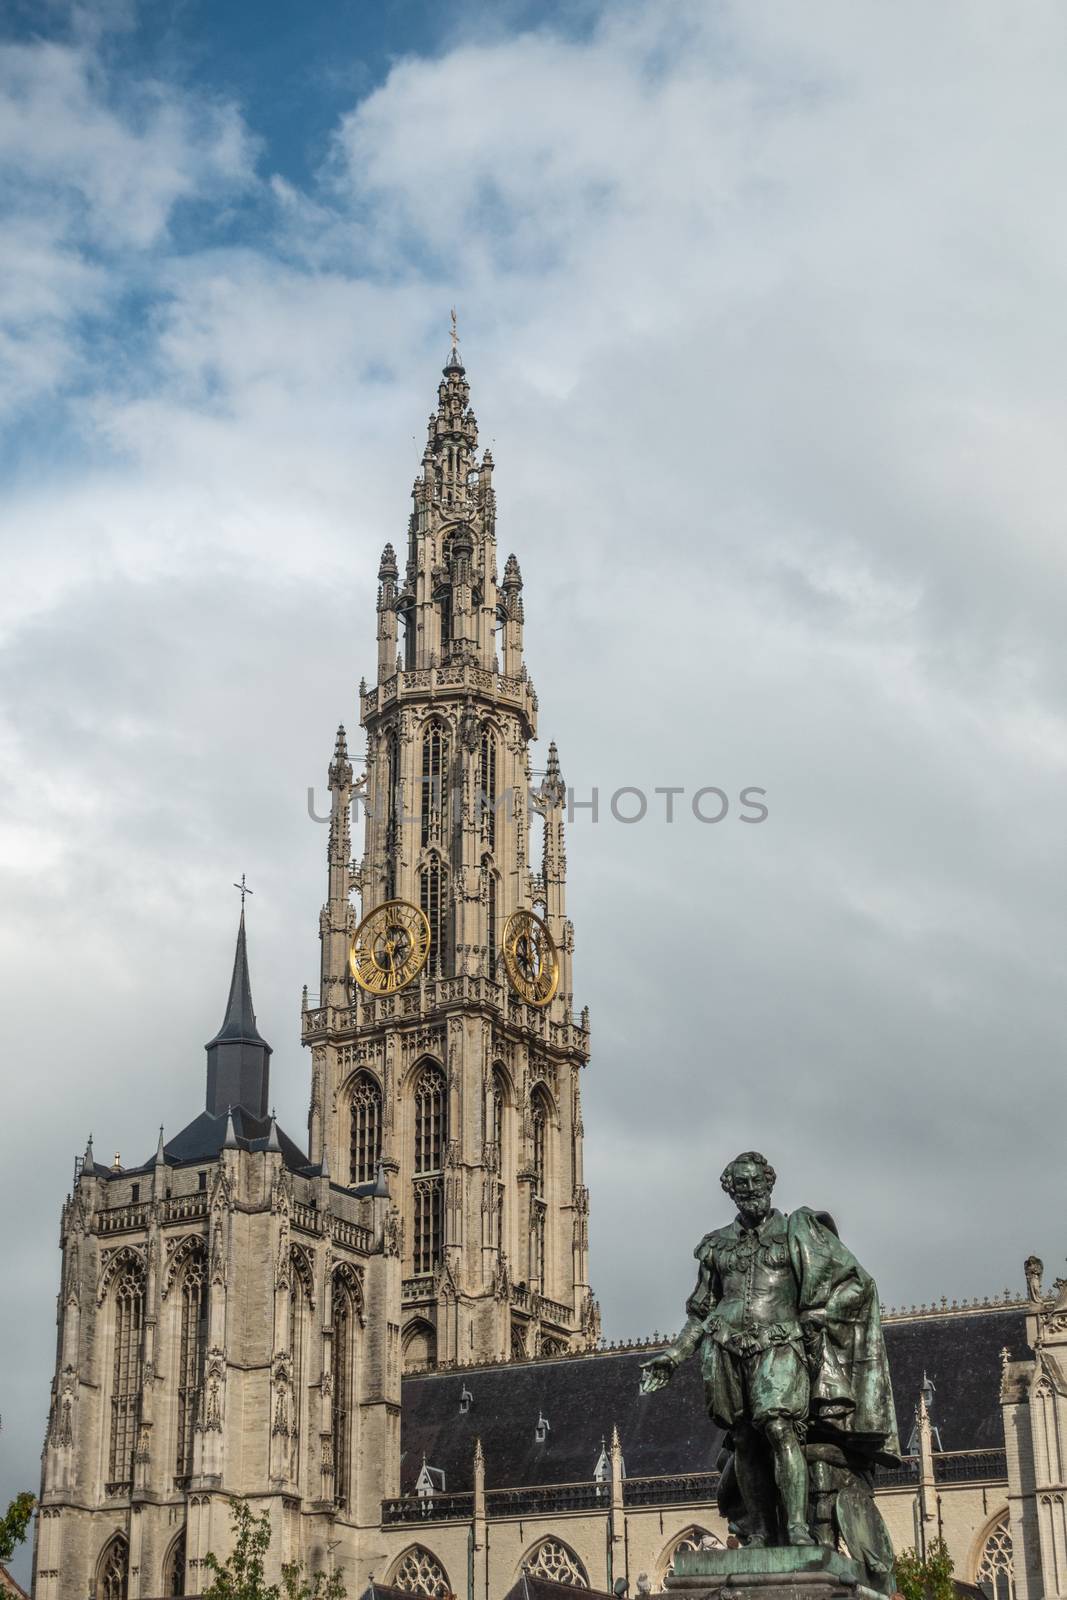 Antwerp, Belgium - September 24, 2018: Peter Paul Rubens bronze statue with towers of Onze-Lieve-Vrouwe Cathedral of Our Lady in back under white cloudy sky.